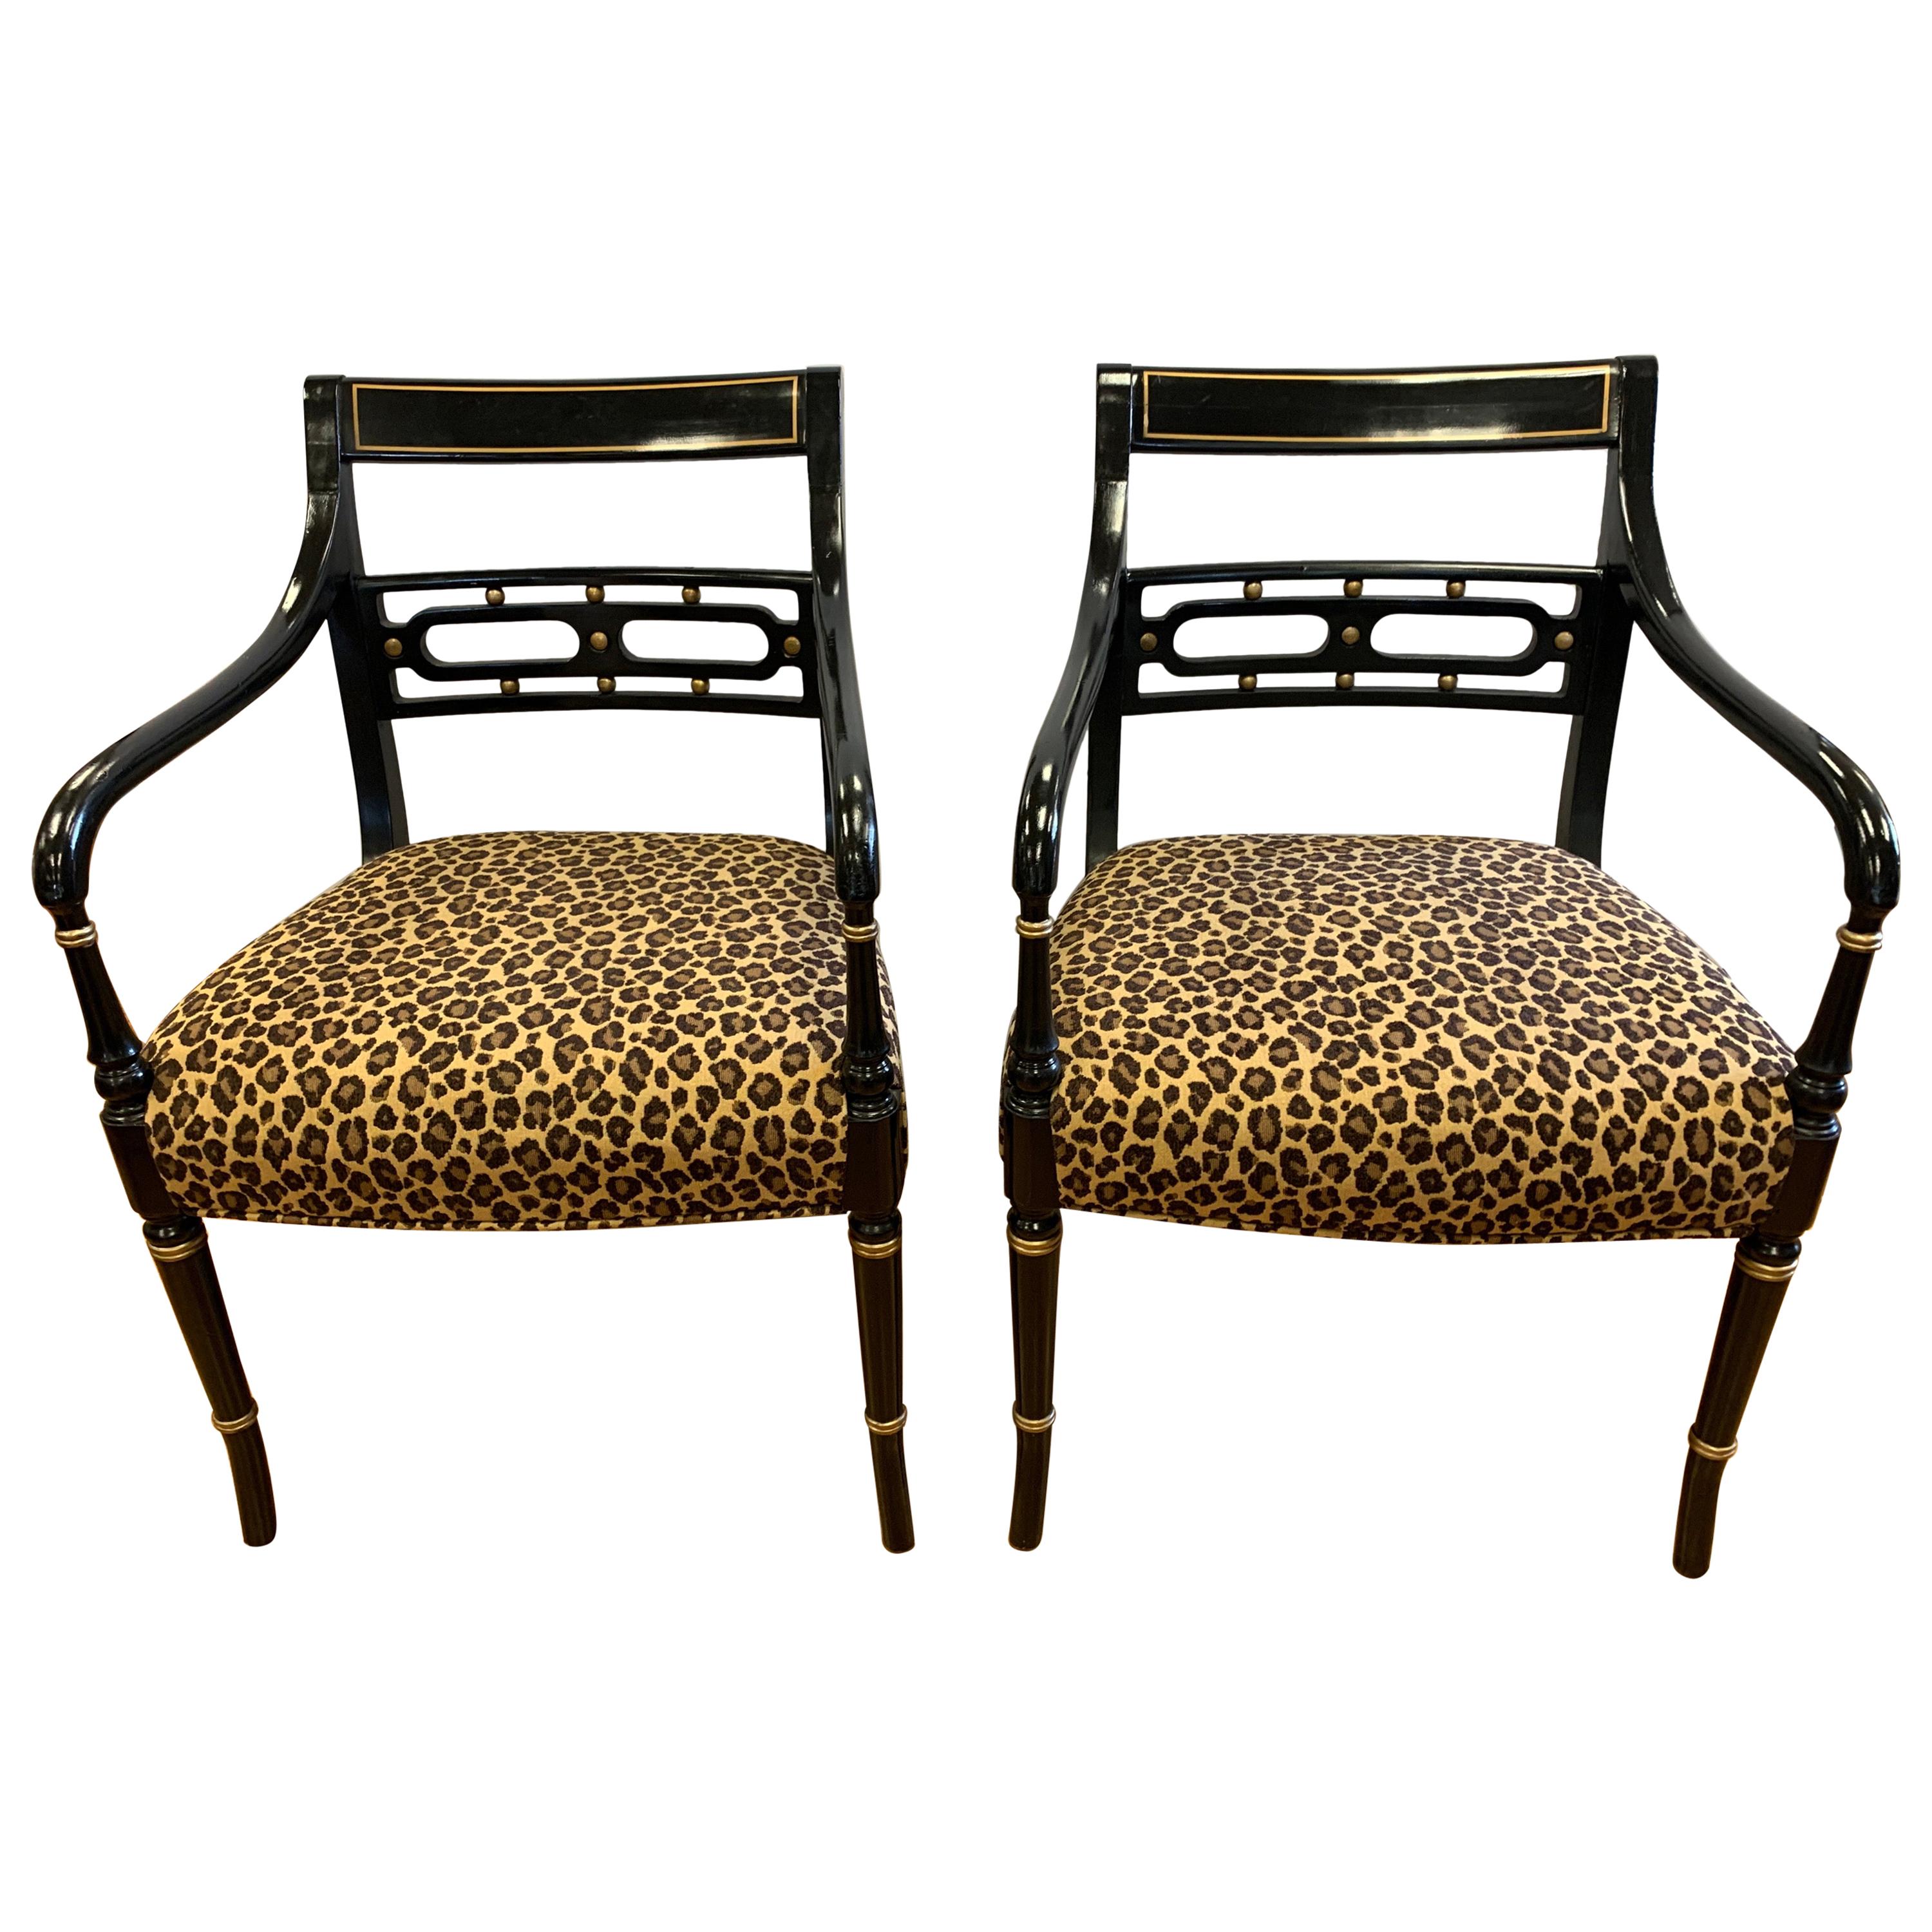 Pair of Regency Style Black Ebonized and Gold Armchairs, New Upholstery